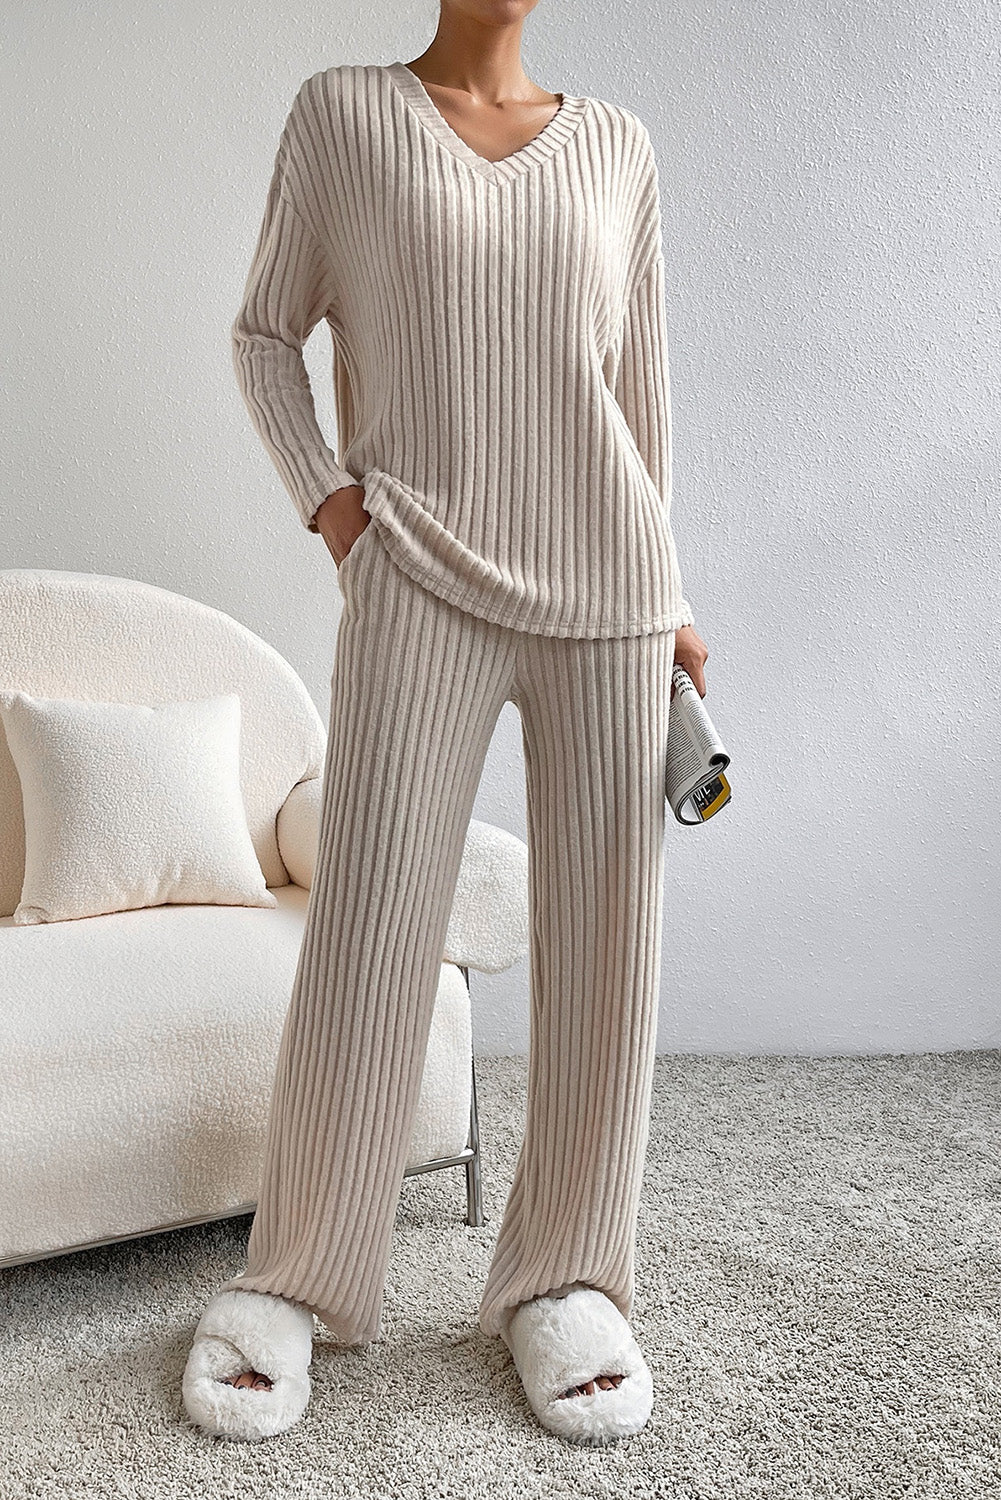 Ribbed Knit V Neck Slouchy Two-piece Outfit - pants or short set various colors - women's pants set at TFC&H Co.